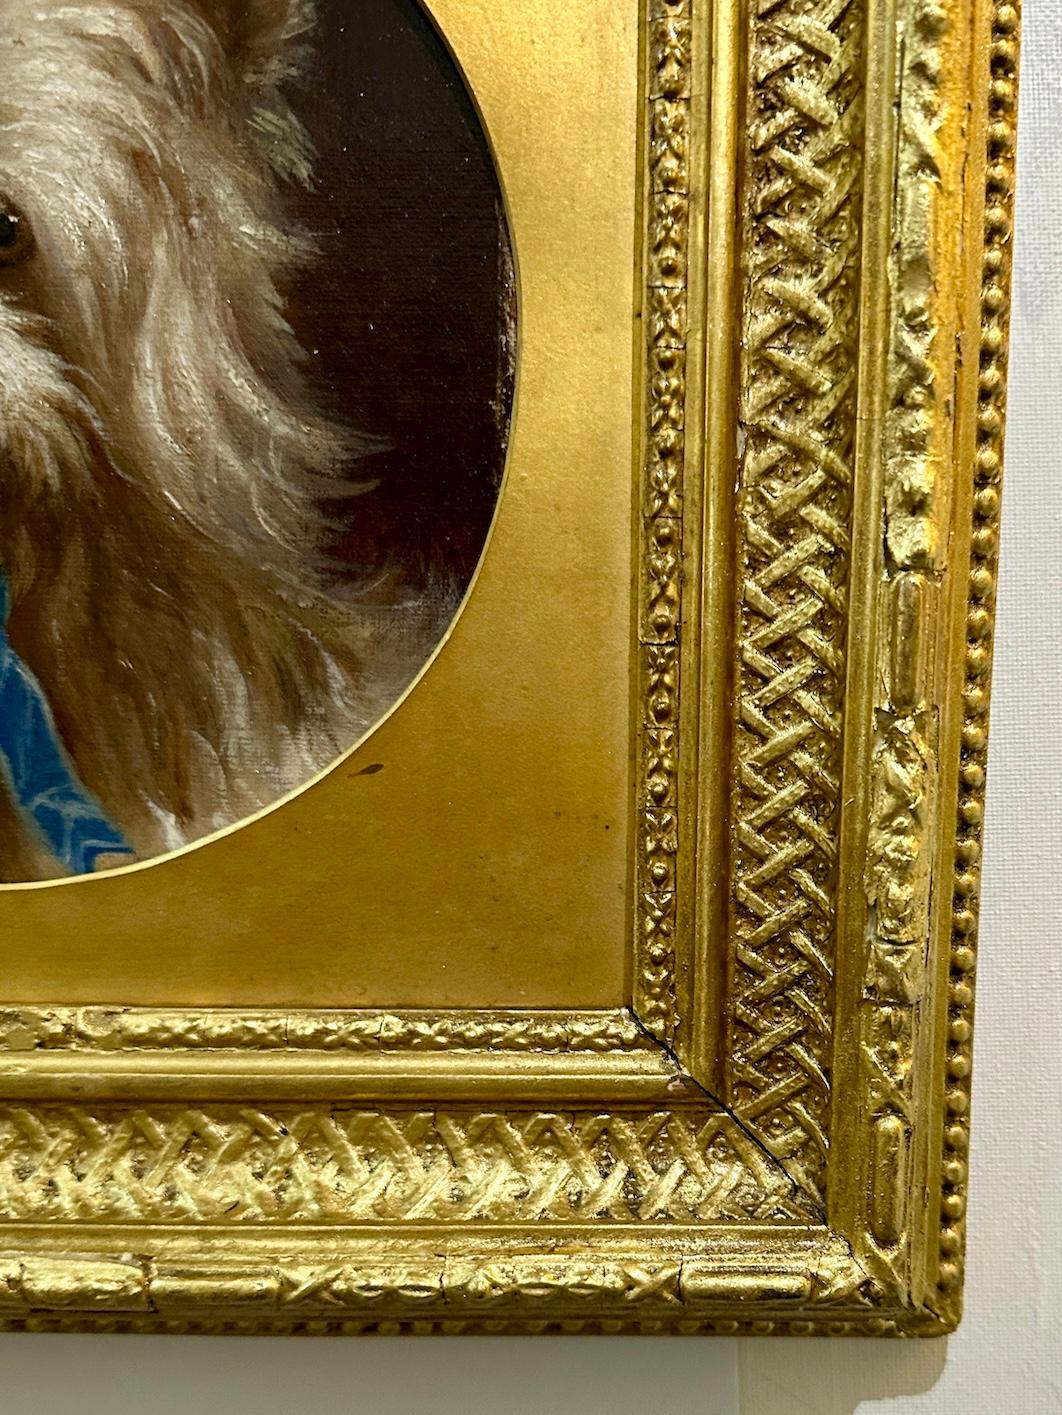 Owning a 19th-century portrait of a terrier or a Bichon dog, especially within its original frame crafted circa 1890 by F.W. Williams, offers a rare opportunity to embrace both artistry and history in a single acquisition. These portraits,